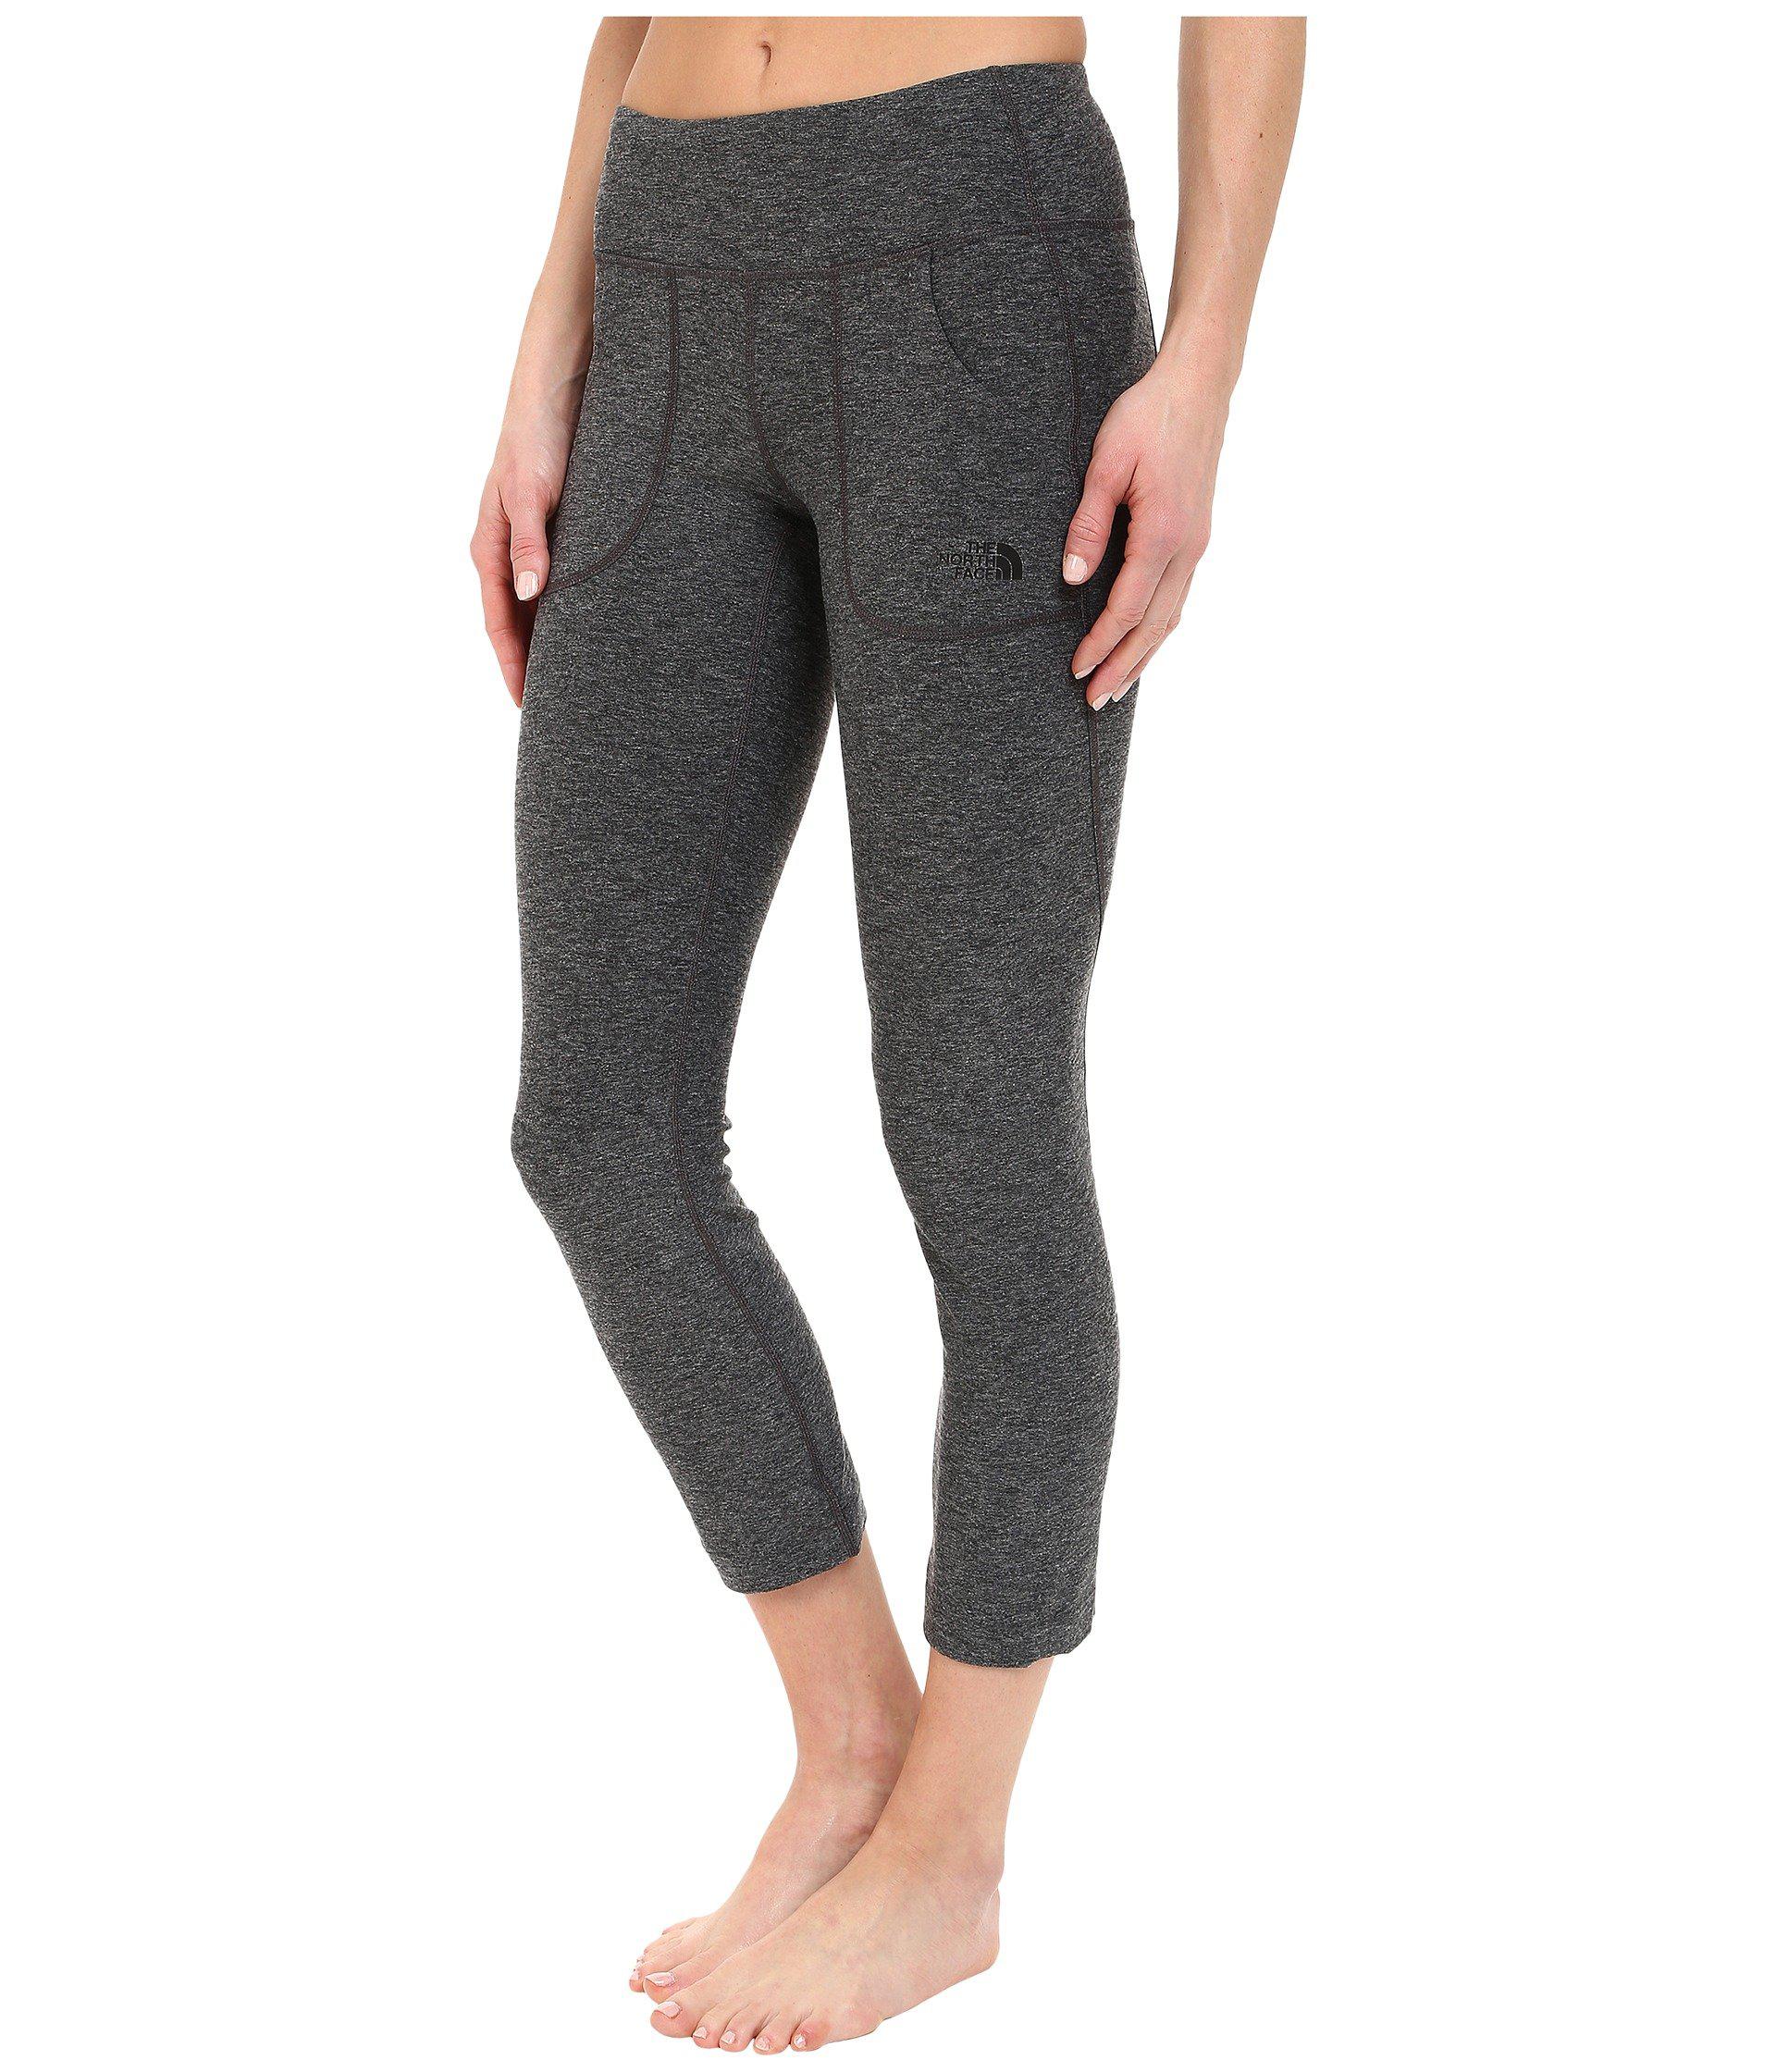 north face women's workout pants